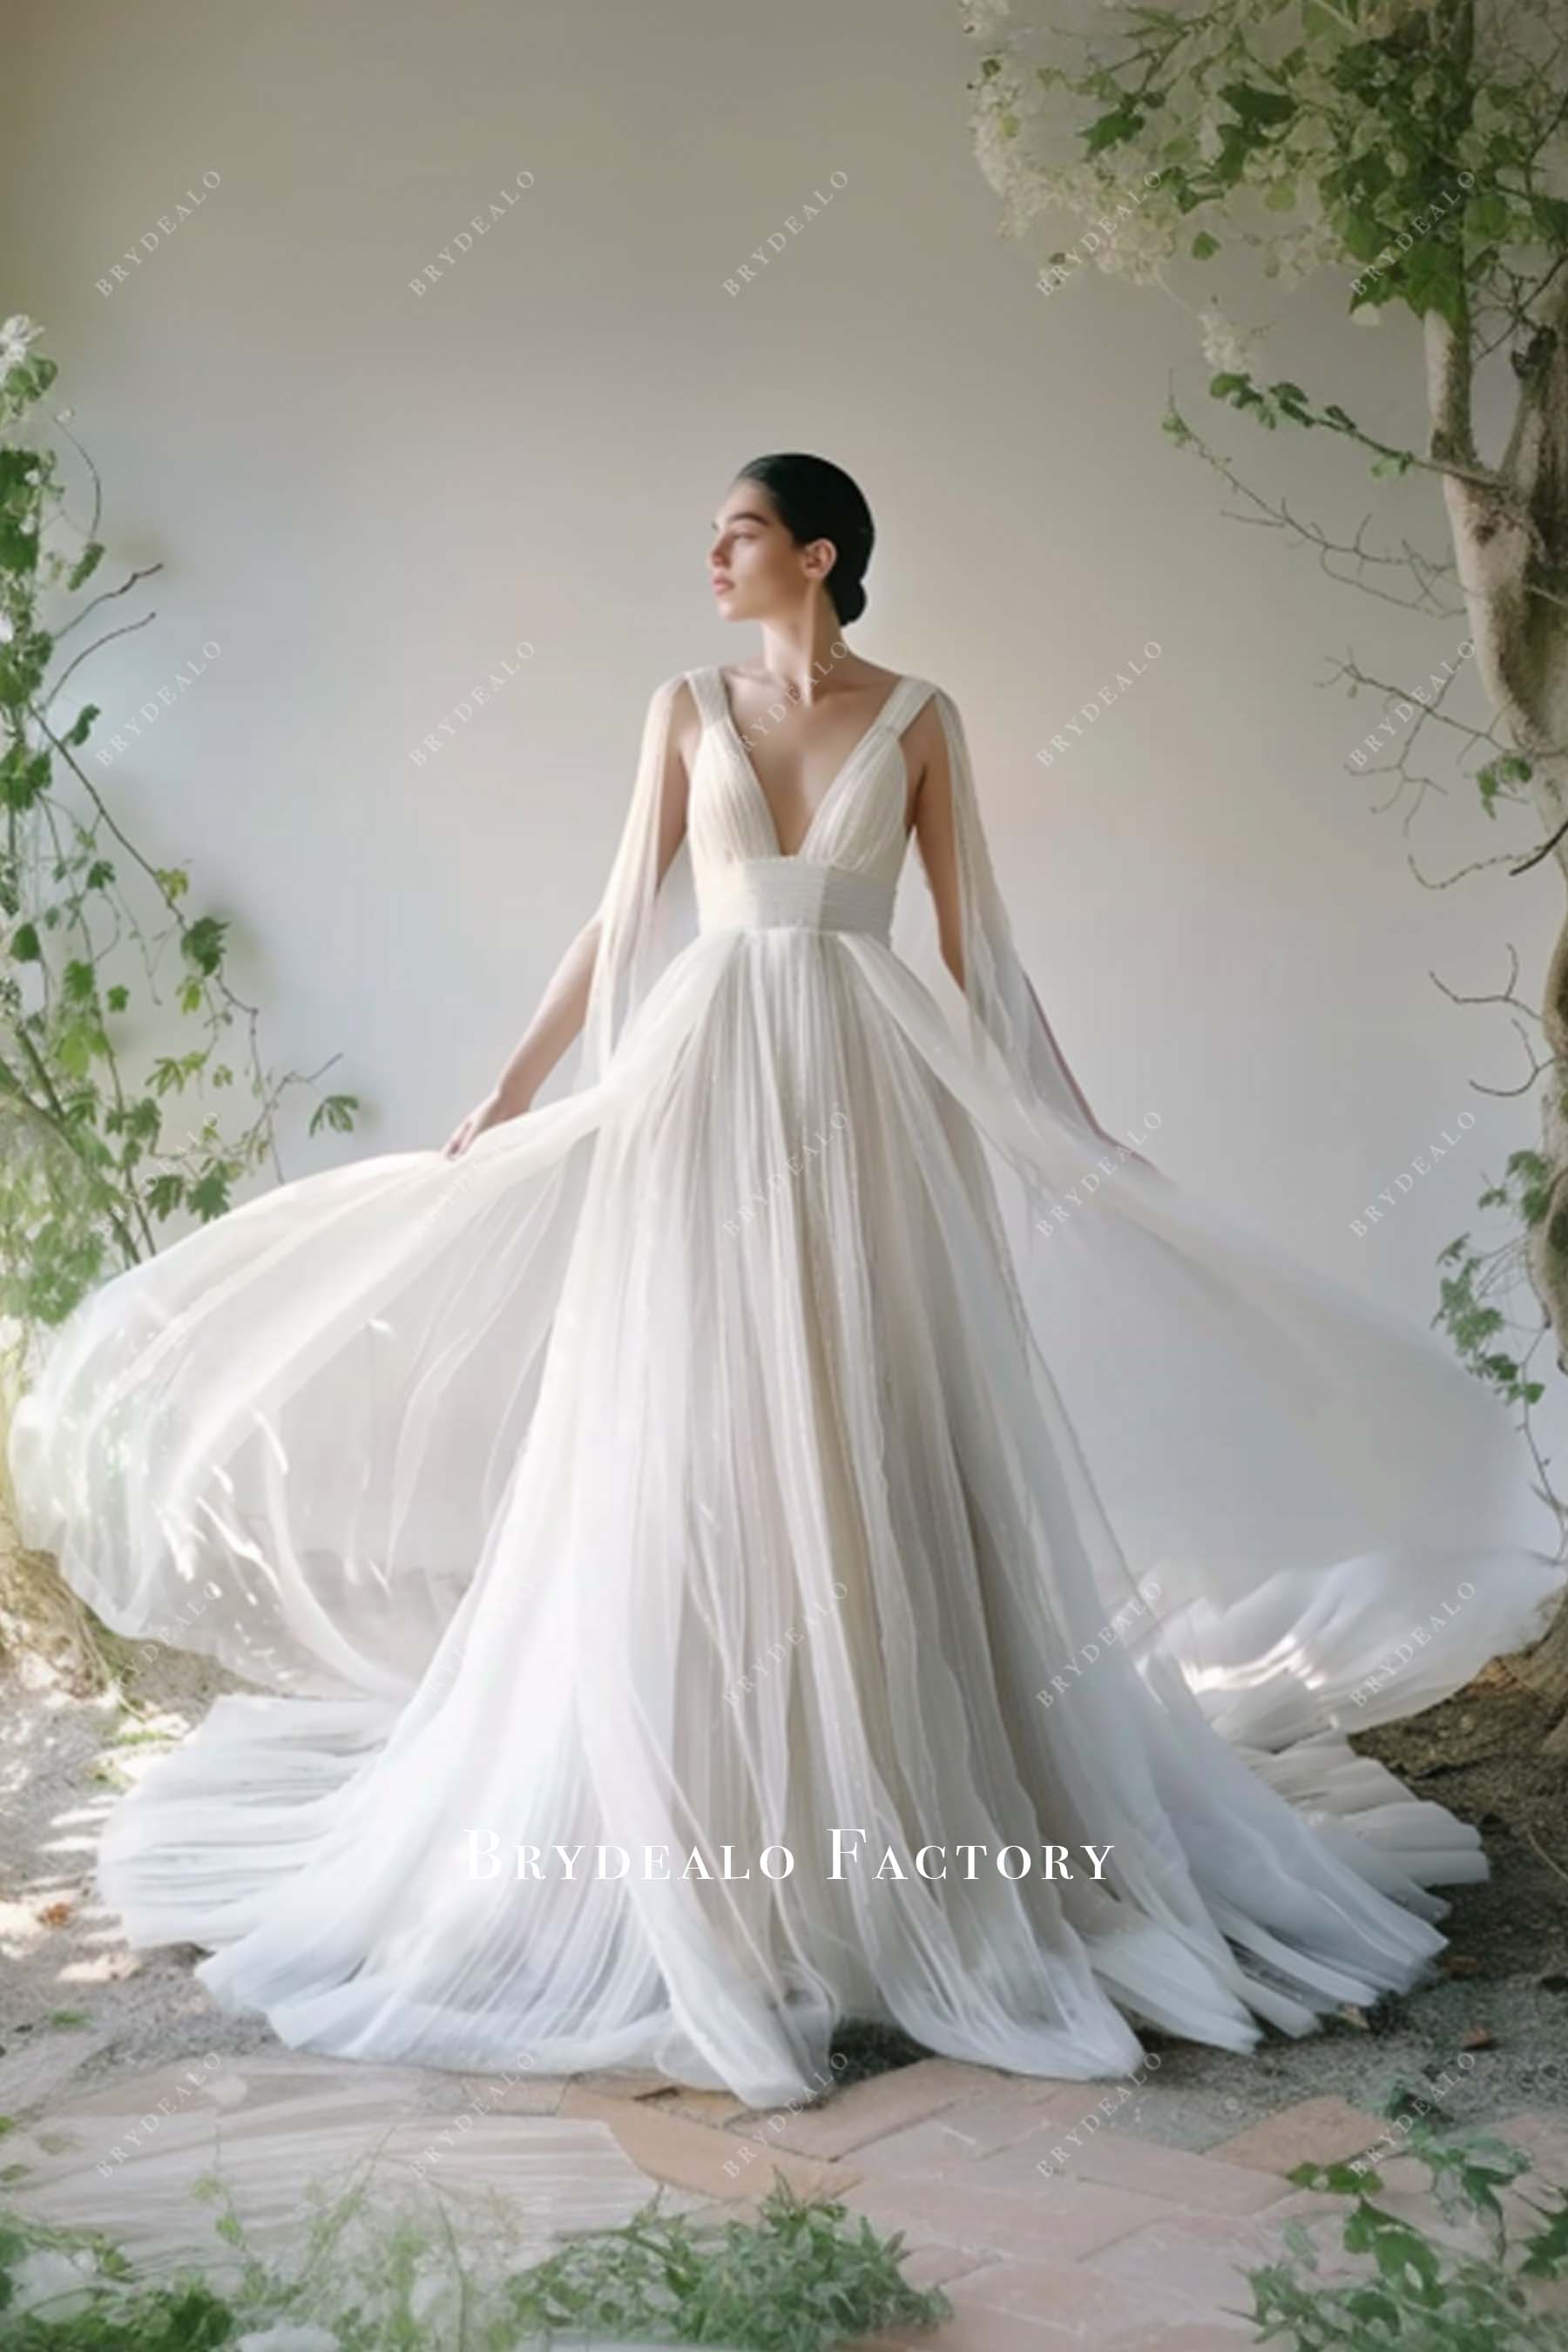 Ruched Plunging Neck Empire Cape Sleeve Wedding Dress